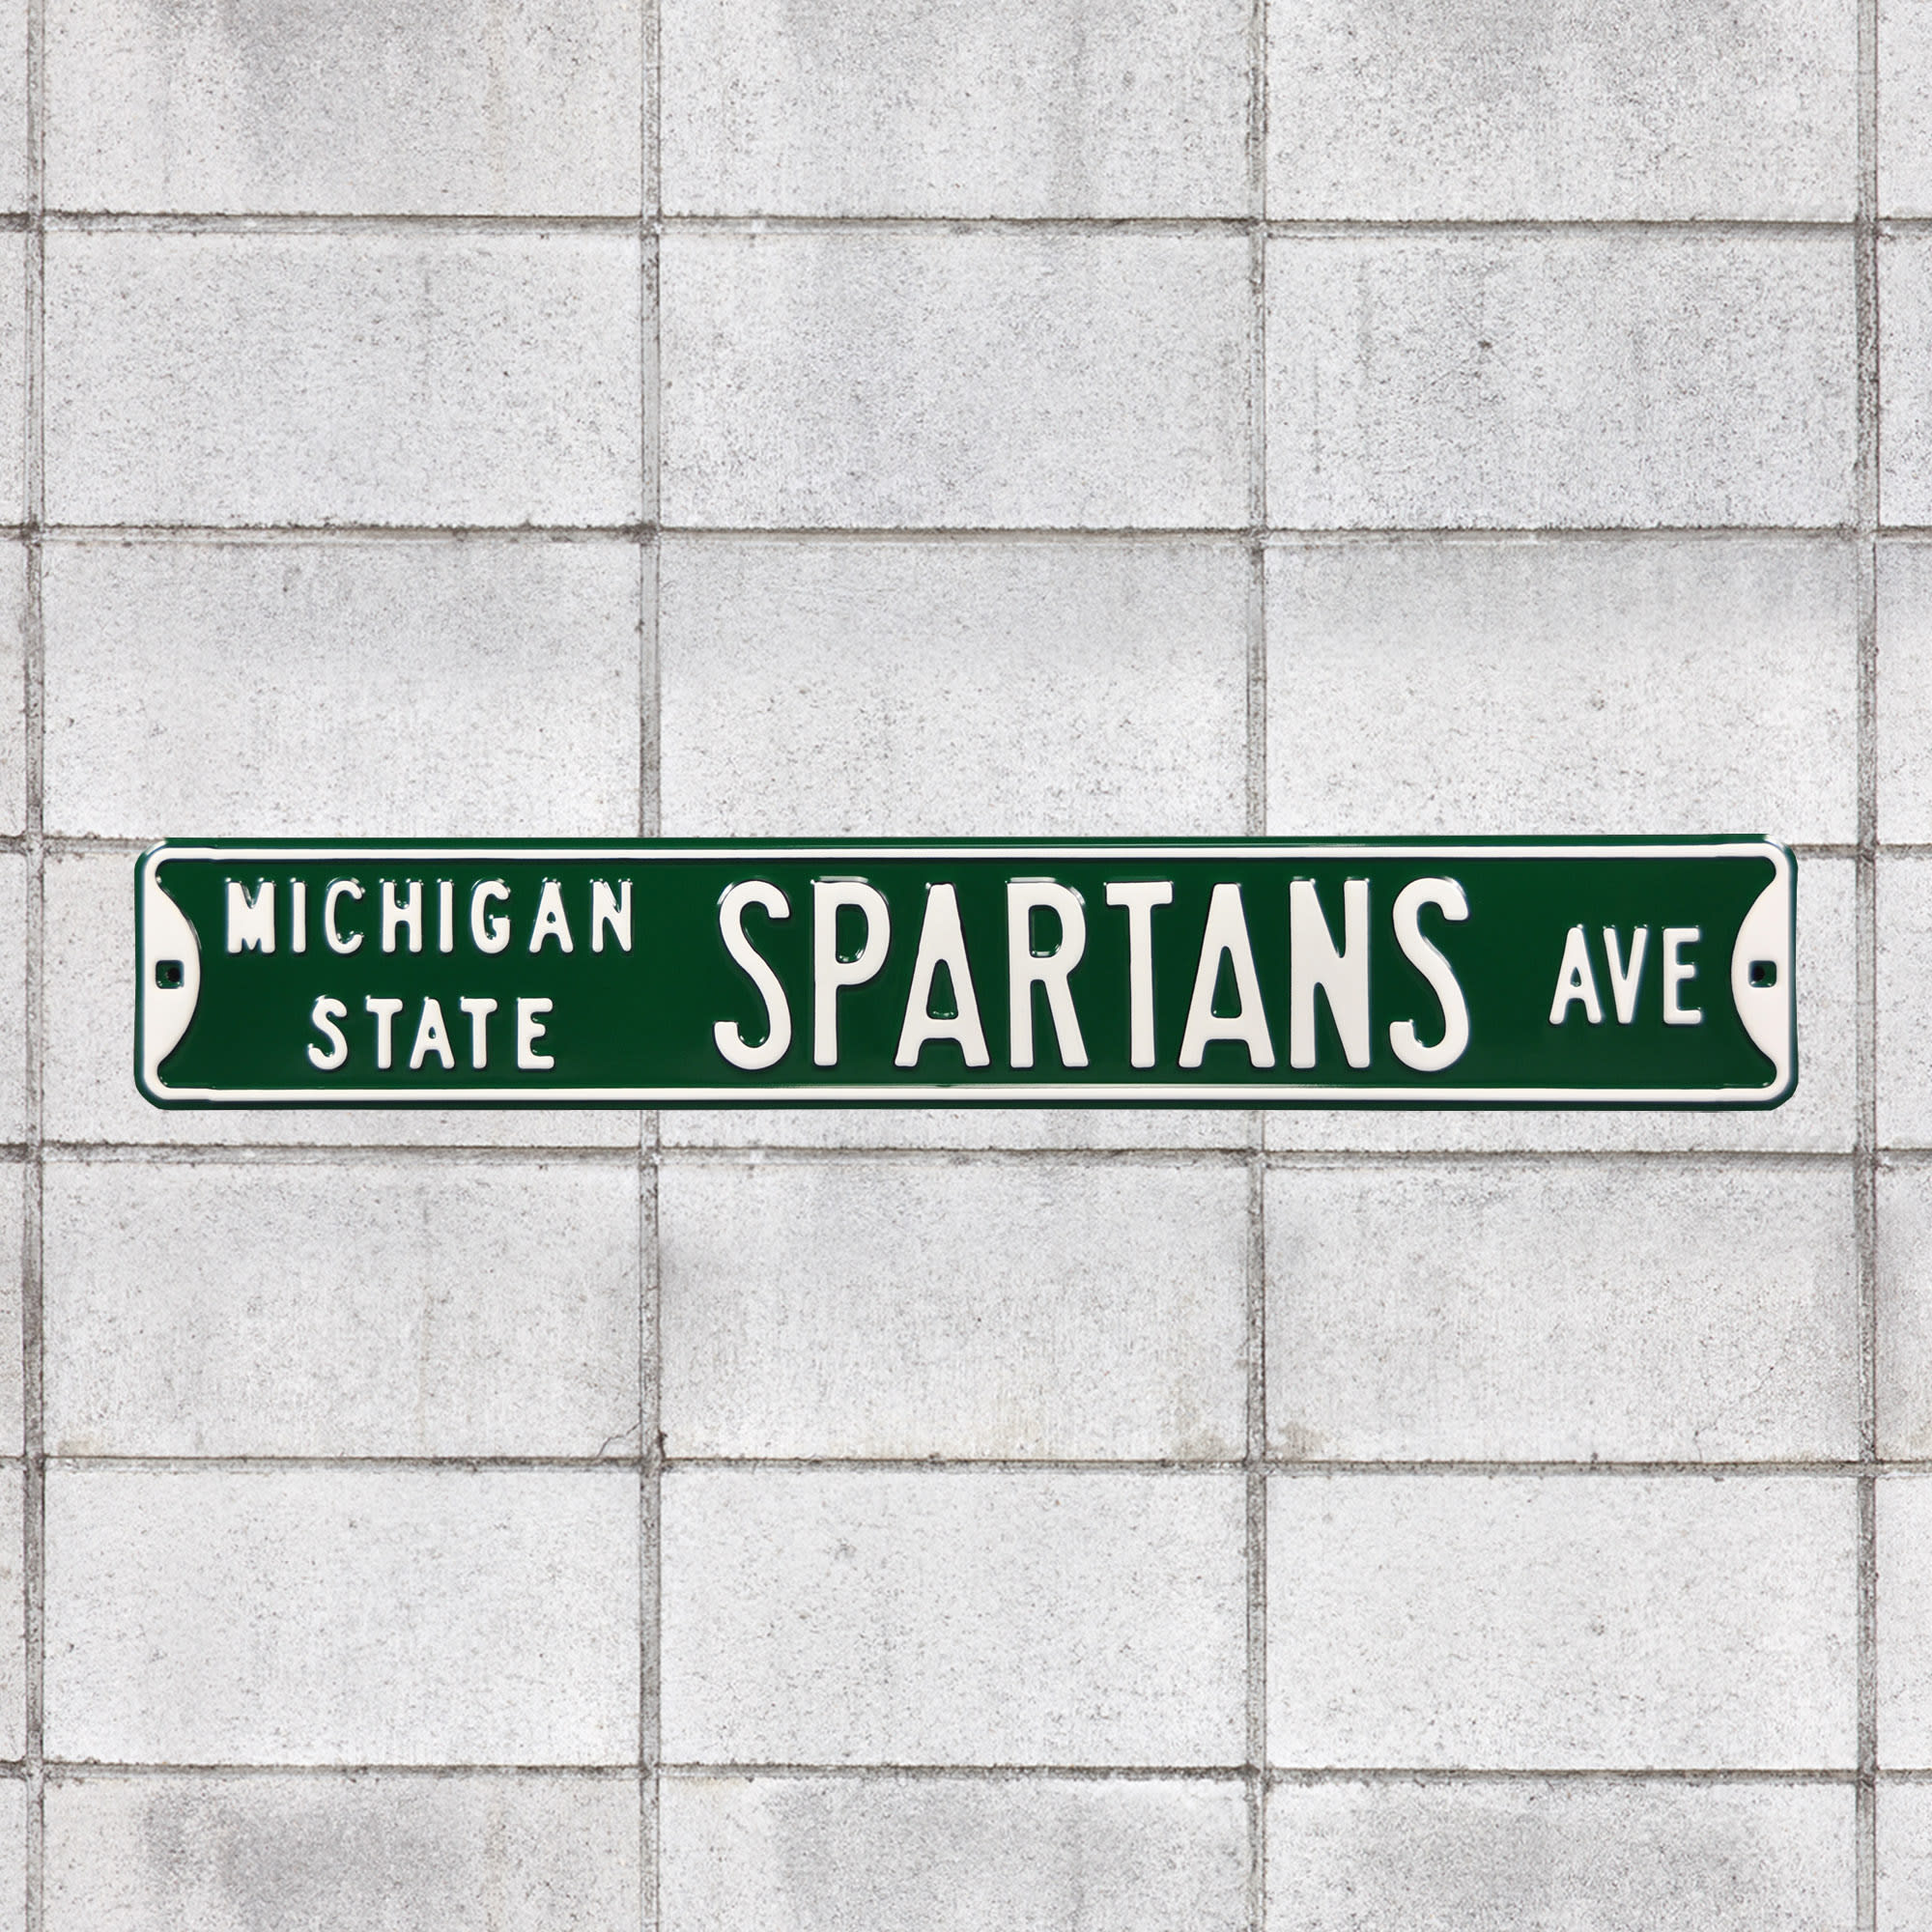 Michigan State Spartans: Michigan State Spartans Avenue - Officially Licensed Metal Street Sign 36.0"W x 6.0"H by Fathead | 100%